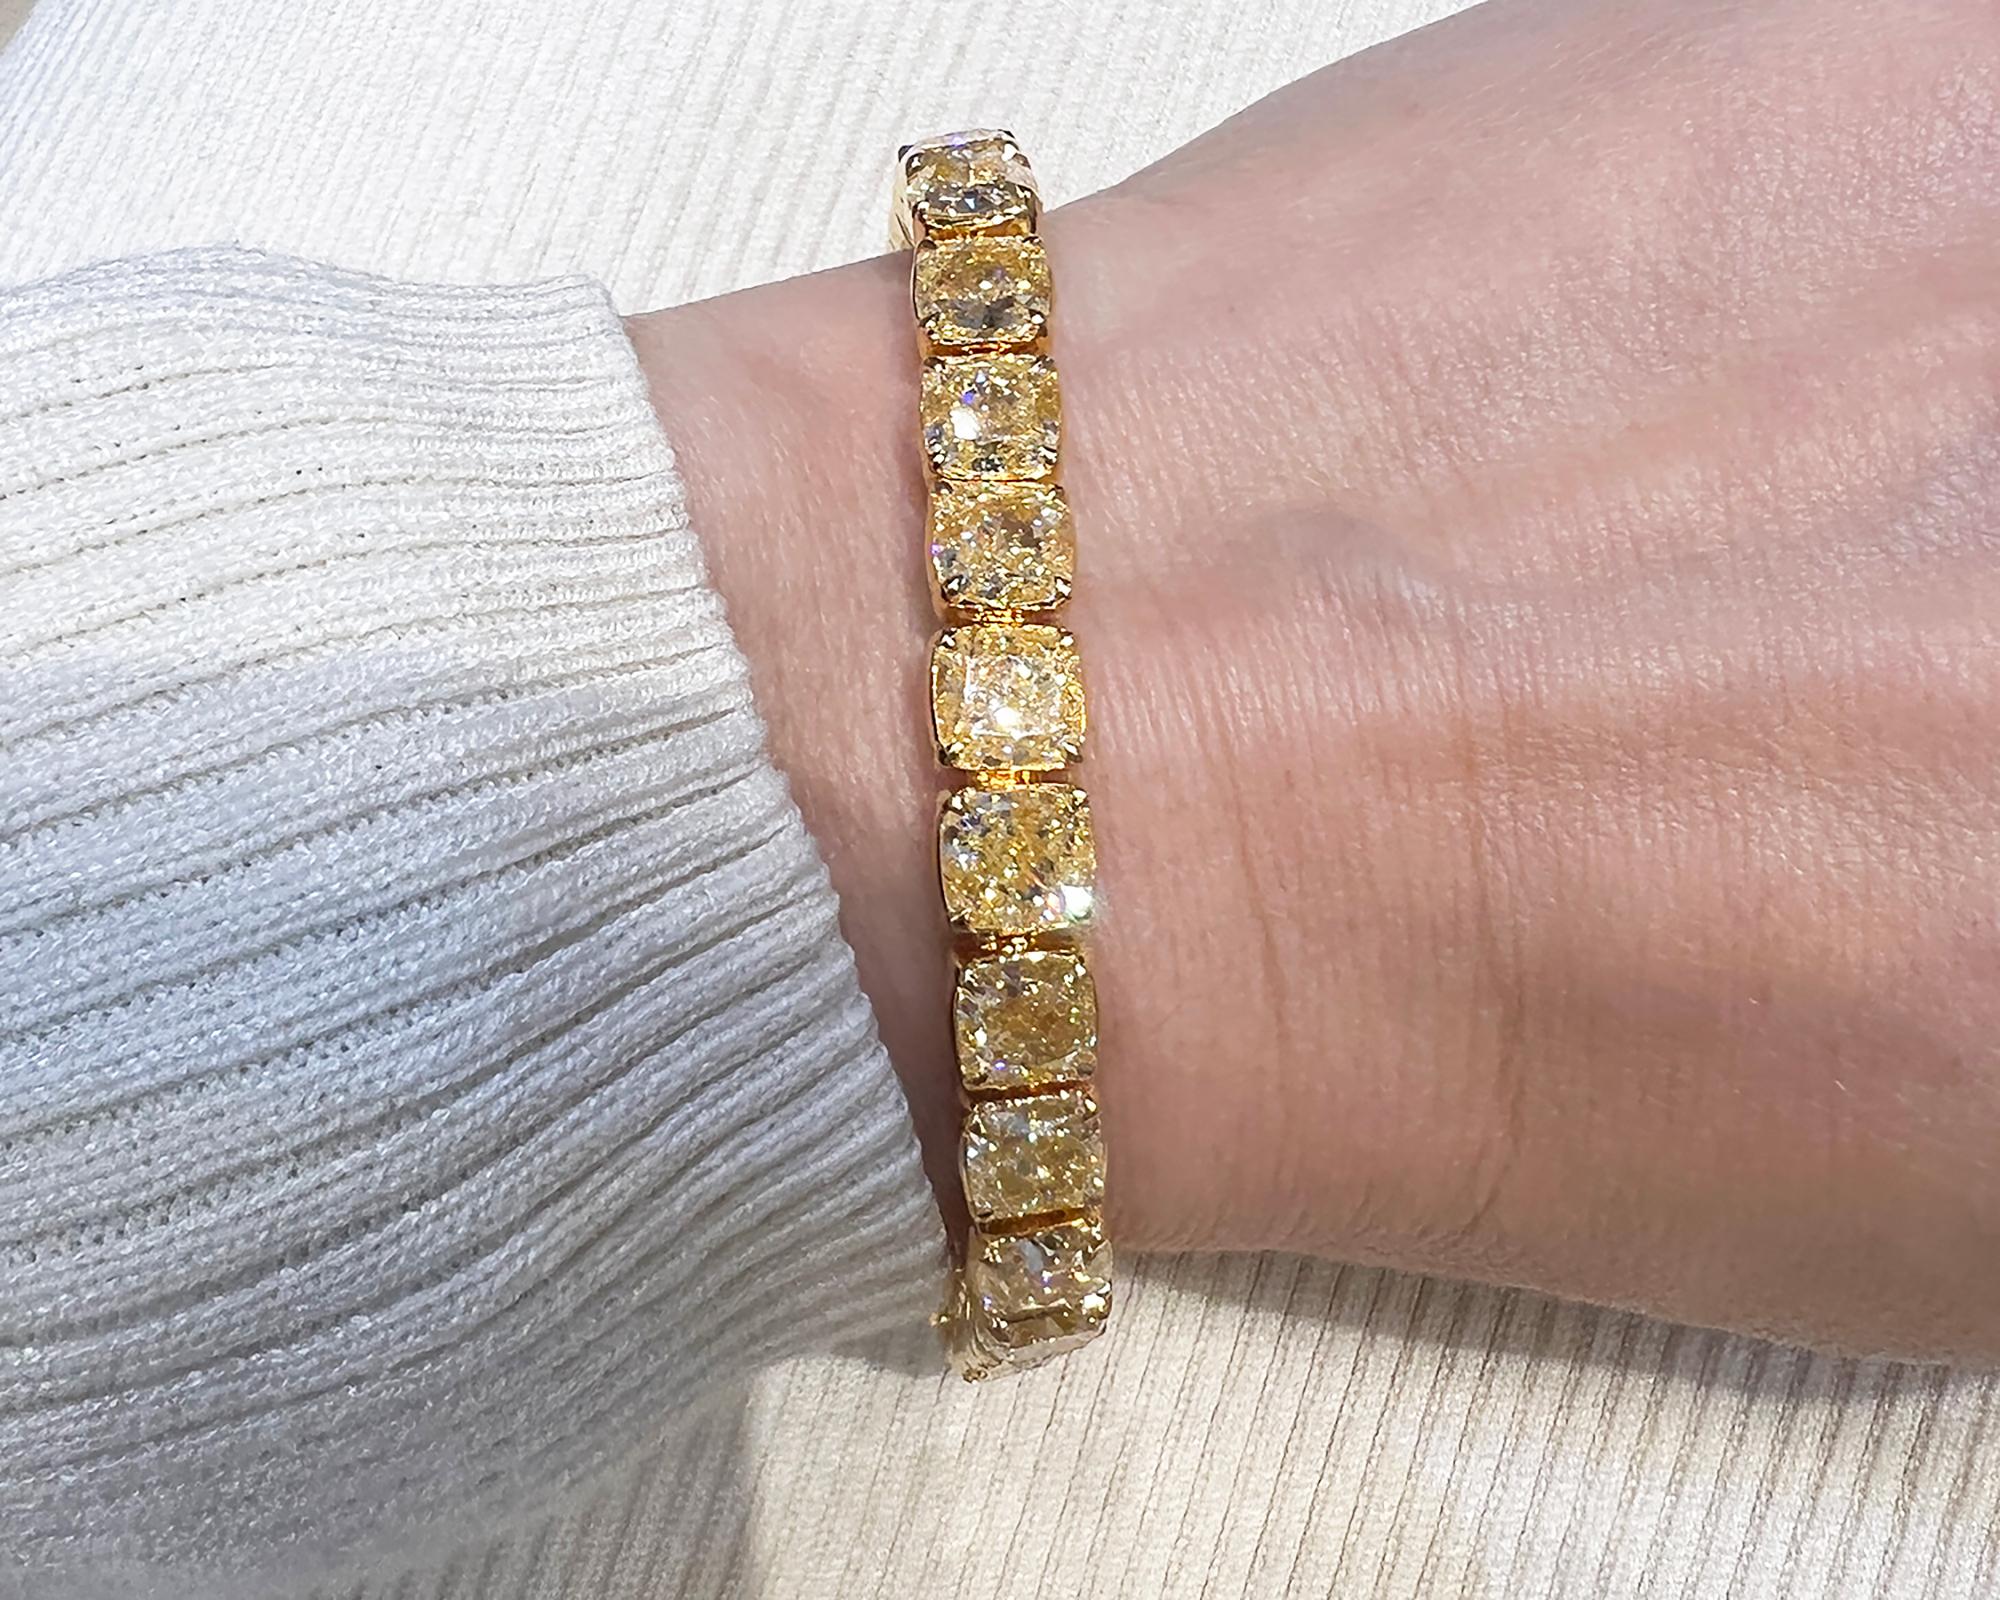 Experience the magnificence of the Spectra Fine Jewelry's Exquisite 32.83-carat Cushion Yellow Diamond Tennis Bracelet – a true work of art. This remarkable bracelet boasts 29 carefully chosen diamonds, each selected for its exceptional beauty and